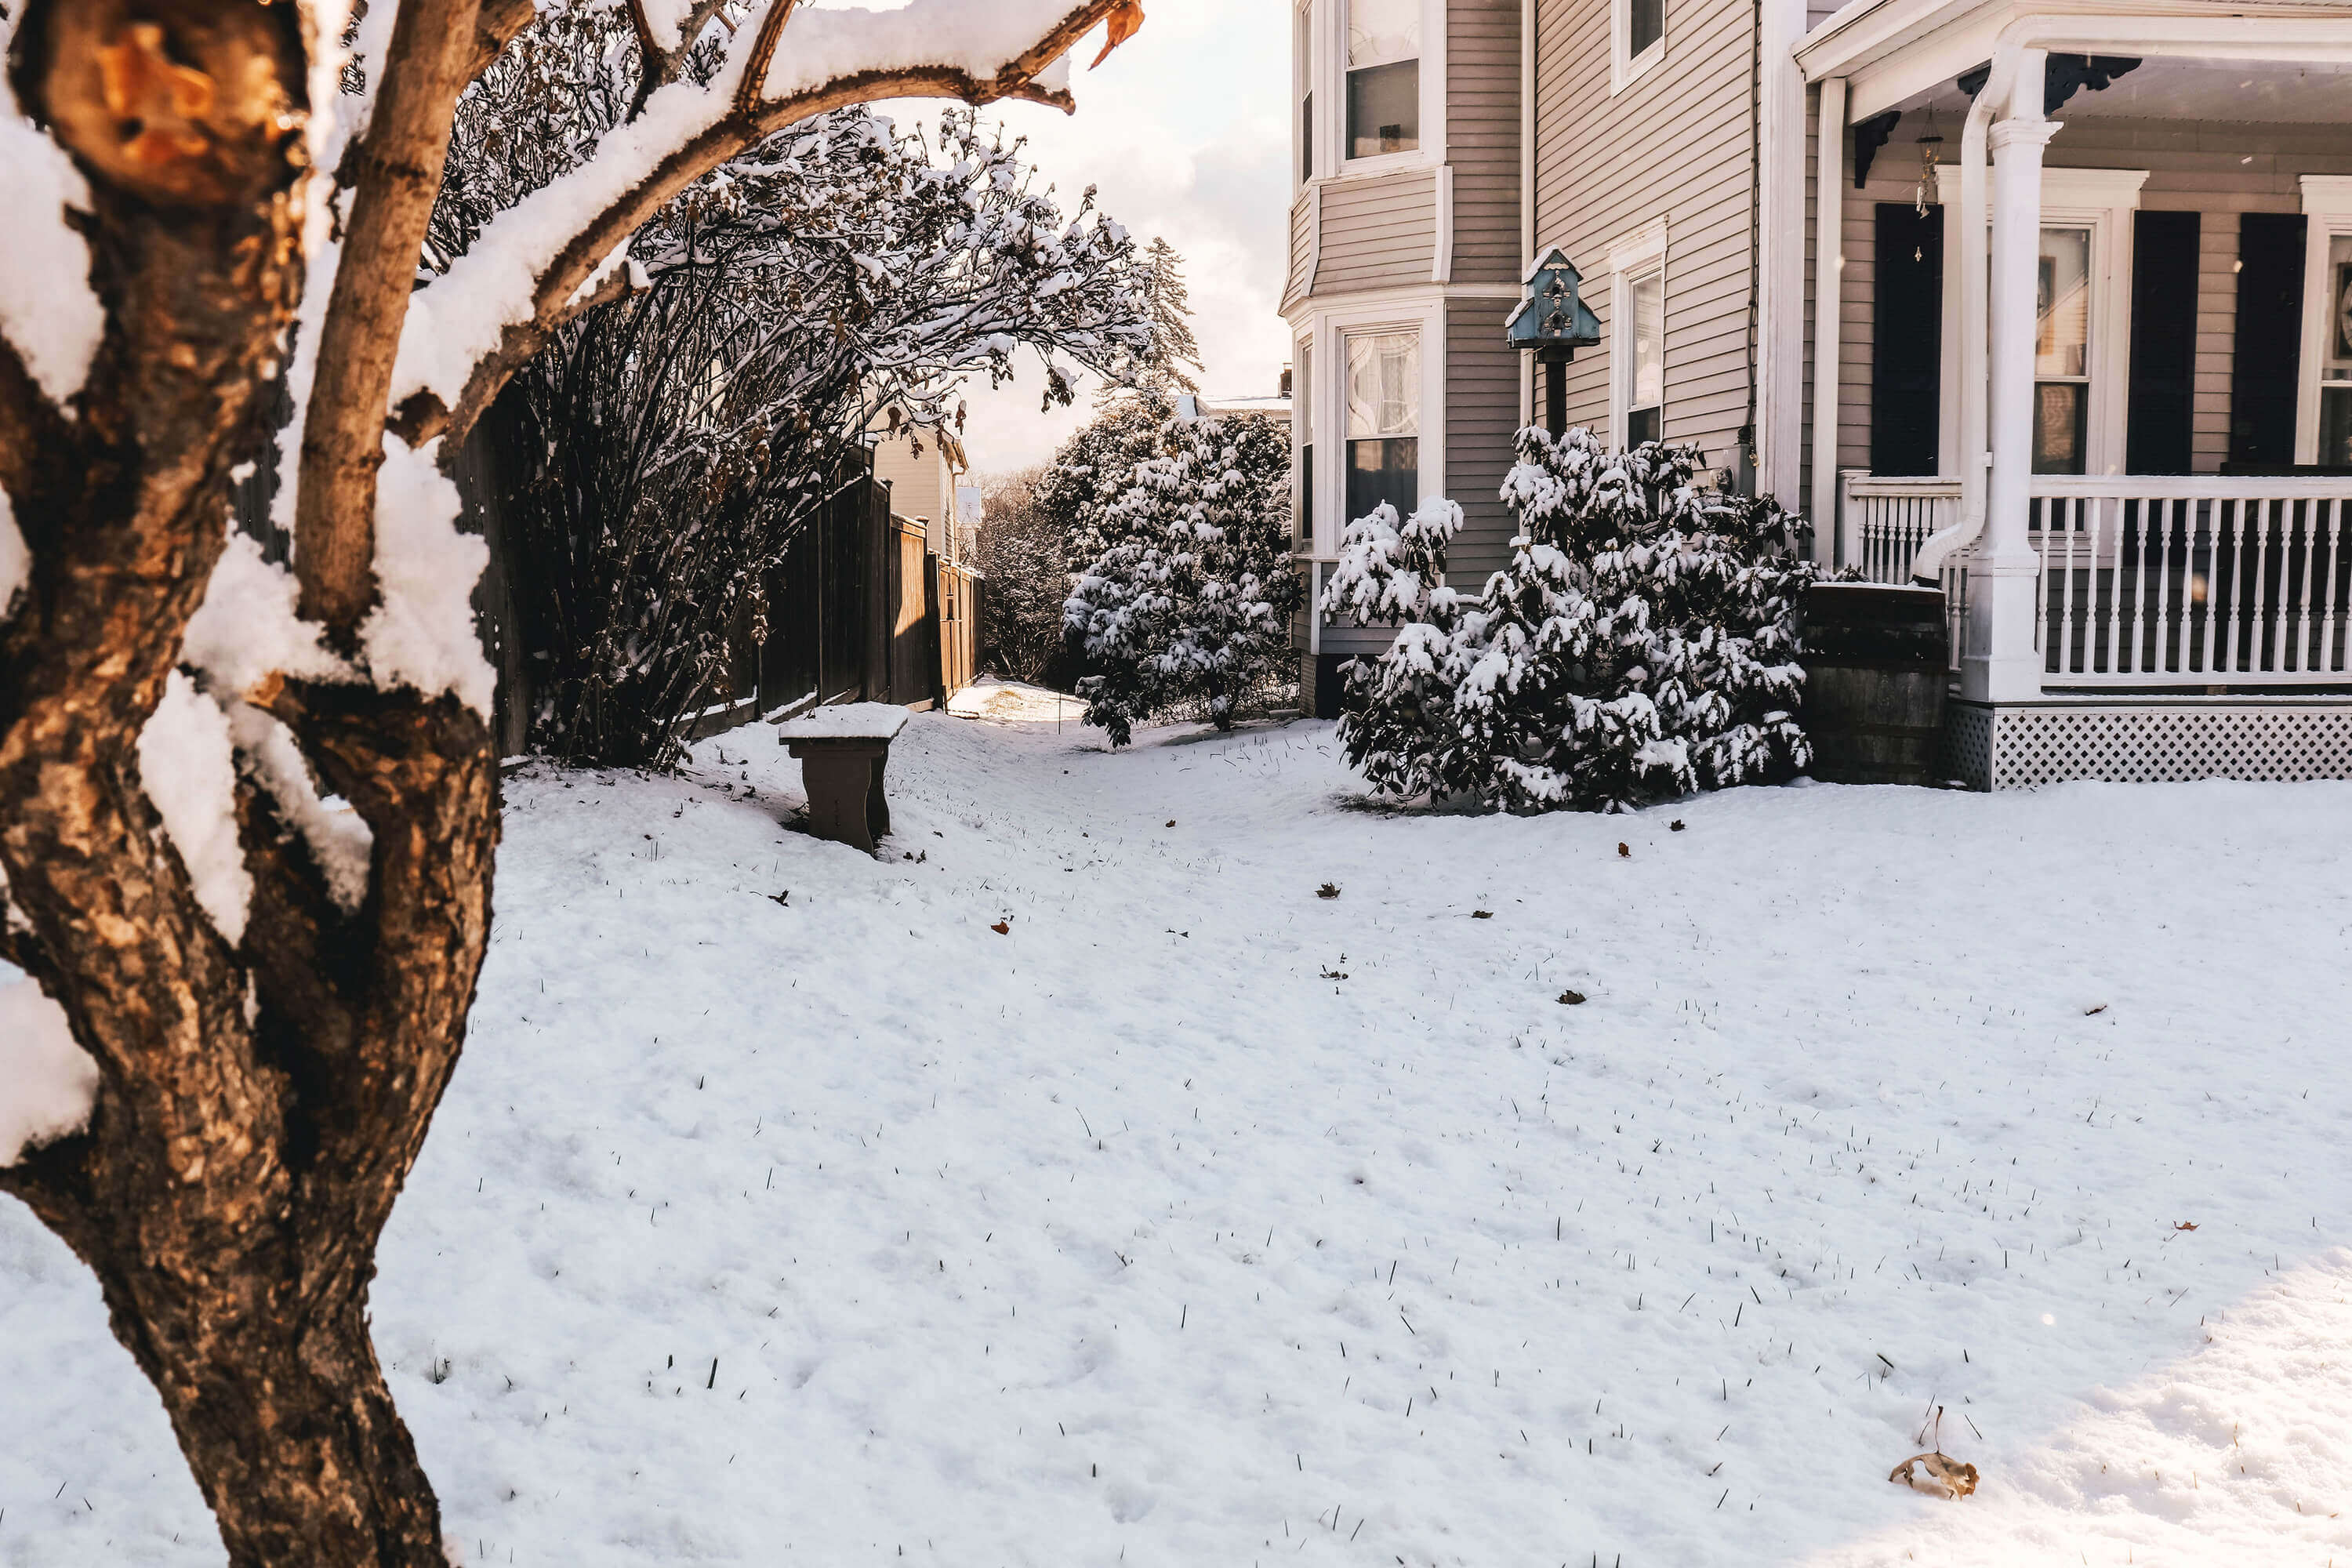 Get your home winter ready - tips from AOA